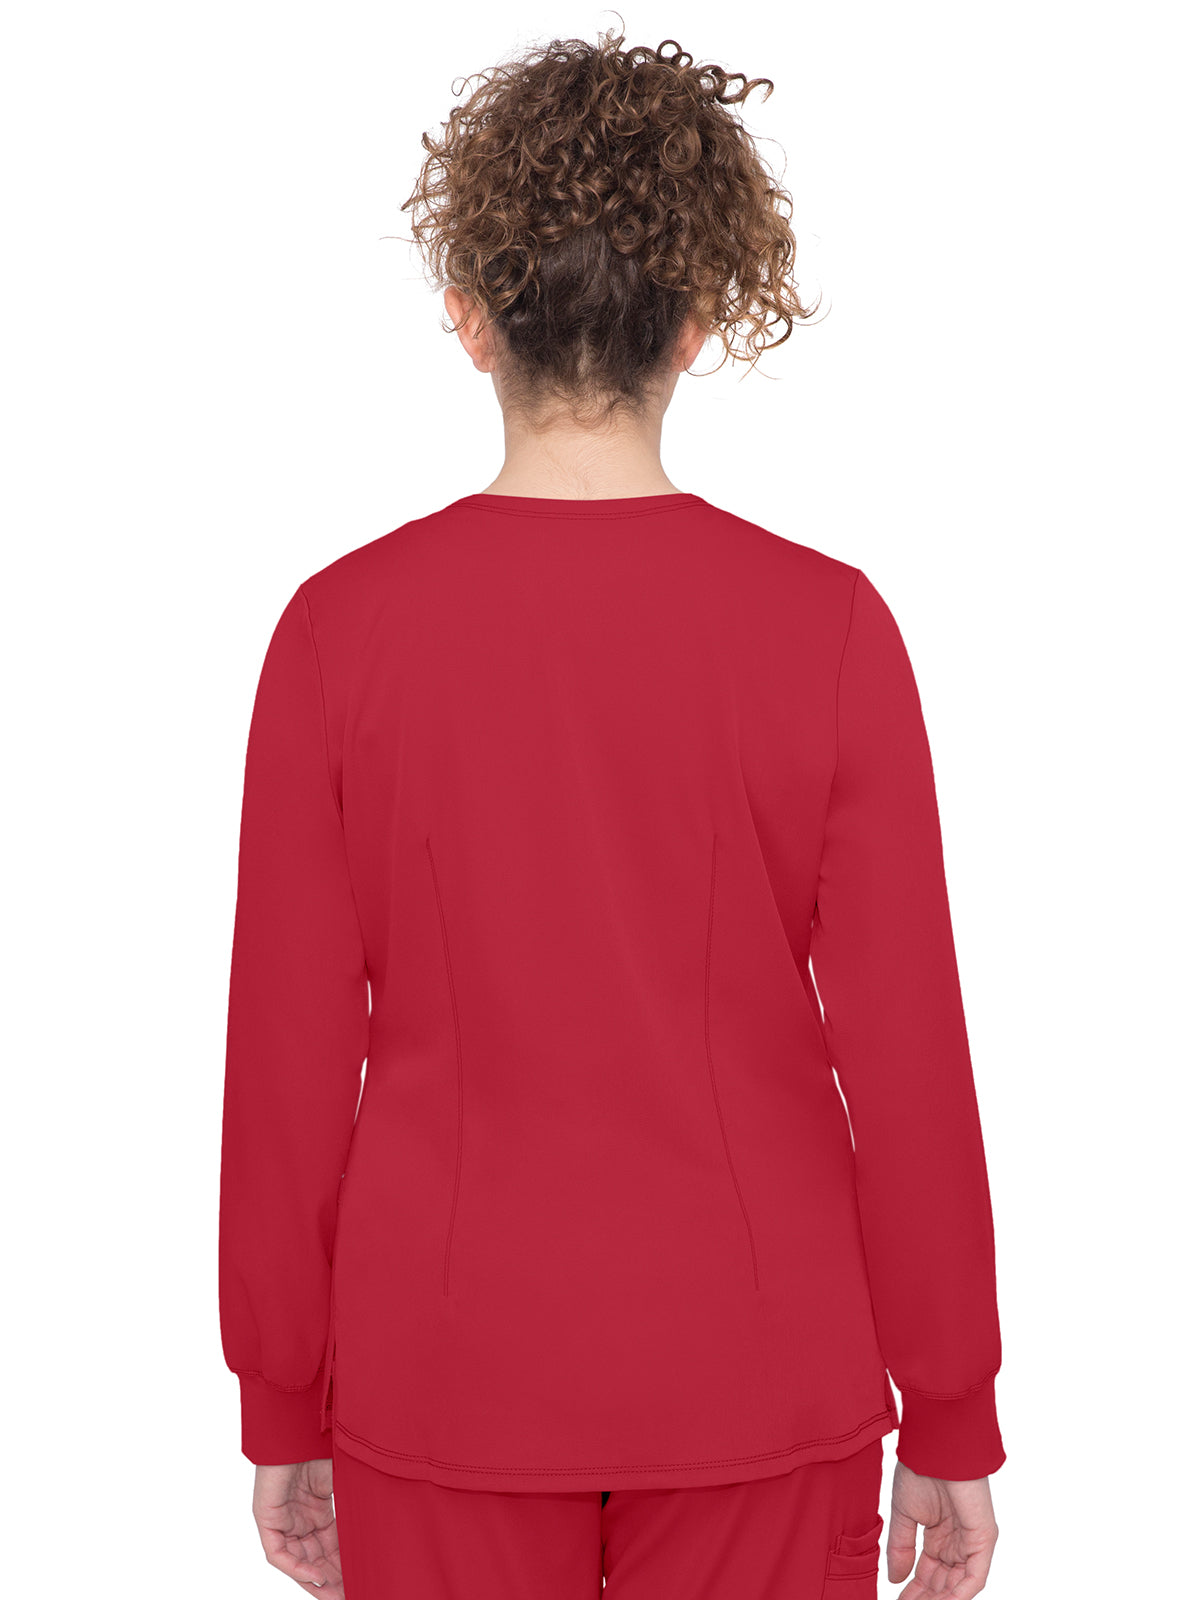 Women's Snap Front Scrub Jacket - 5500 - Red